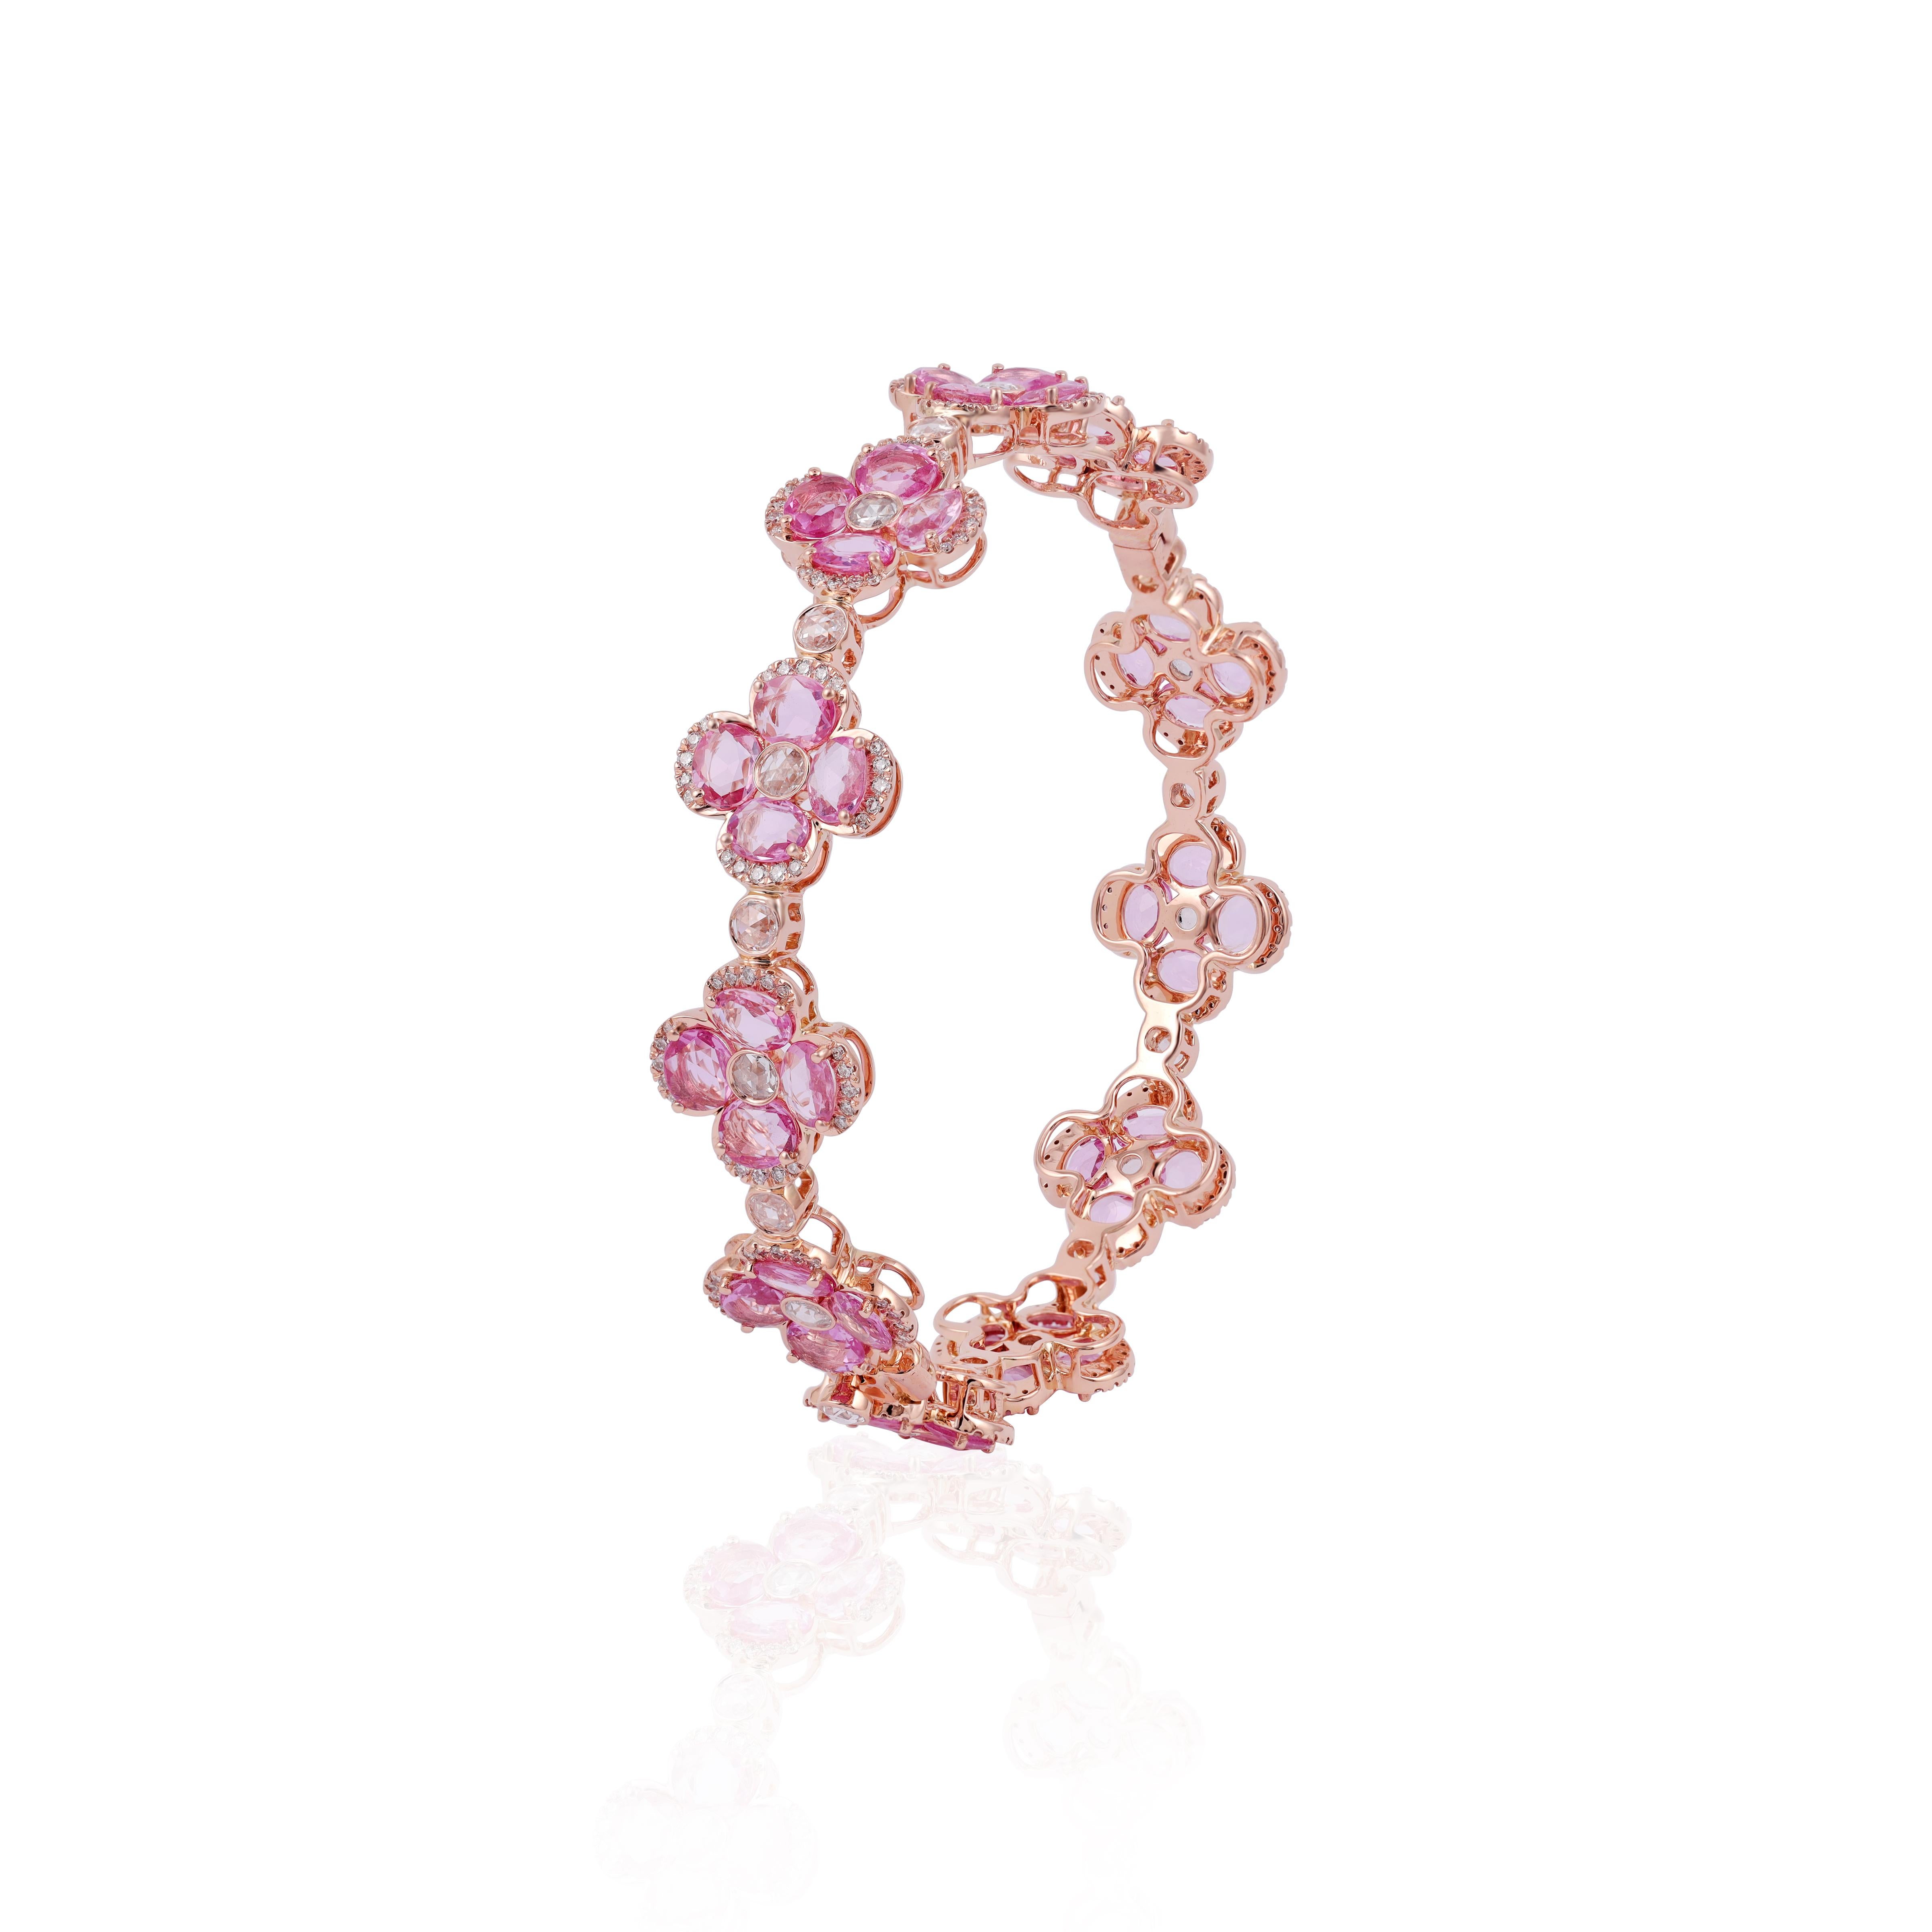 12.11 Carat Pink Sapphire
 and Diamond  Bracelet in 18K Rose Gold

This magnificent Oval shape Pink Sapphire Flower Bangle is incredulous. The solitaire Oval-shaped Oval-cut sapphires are beautifully With Single Rose cut Diamonds & Small Diamond